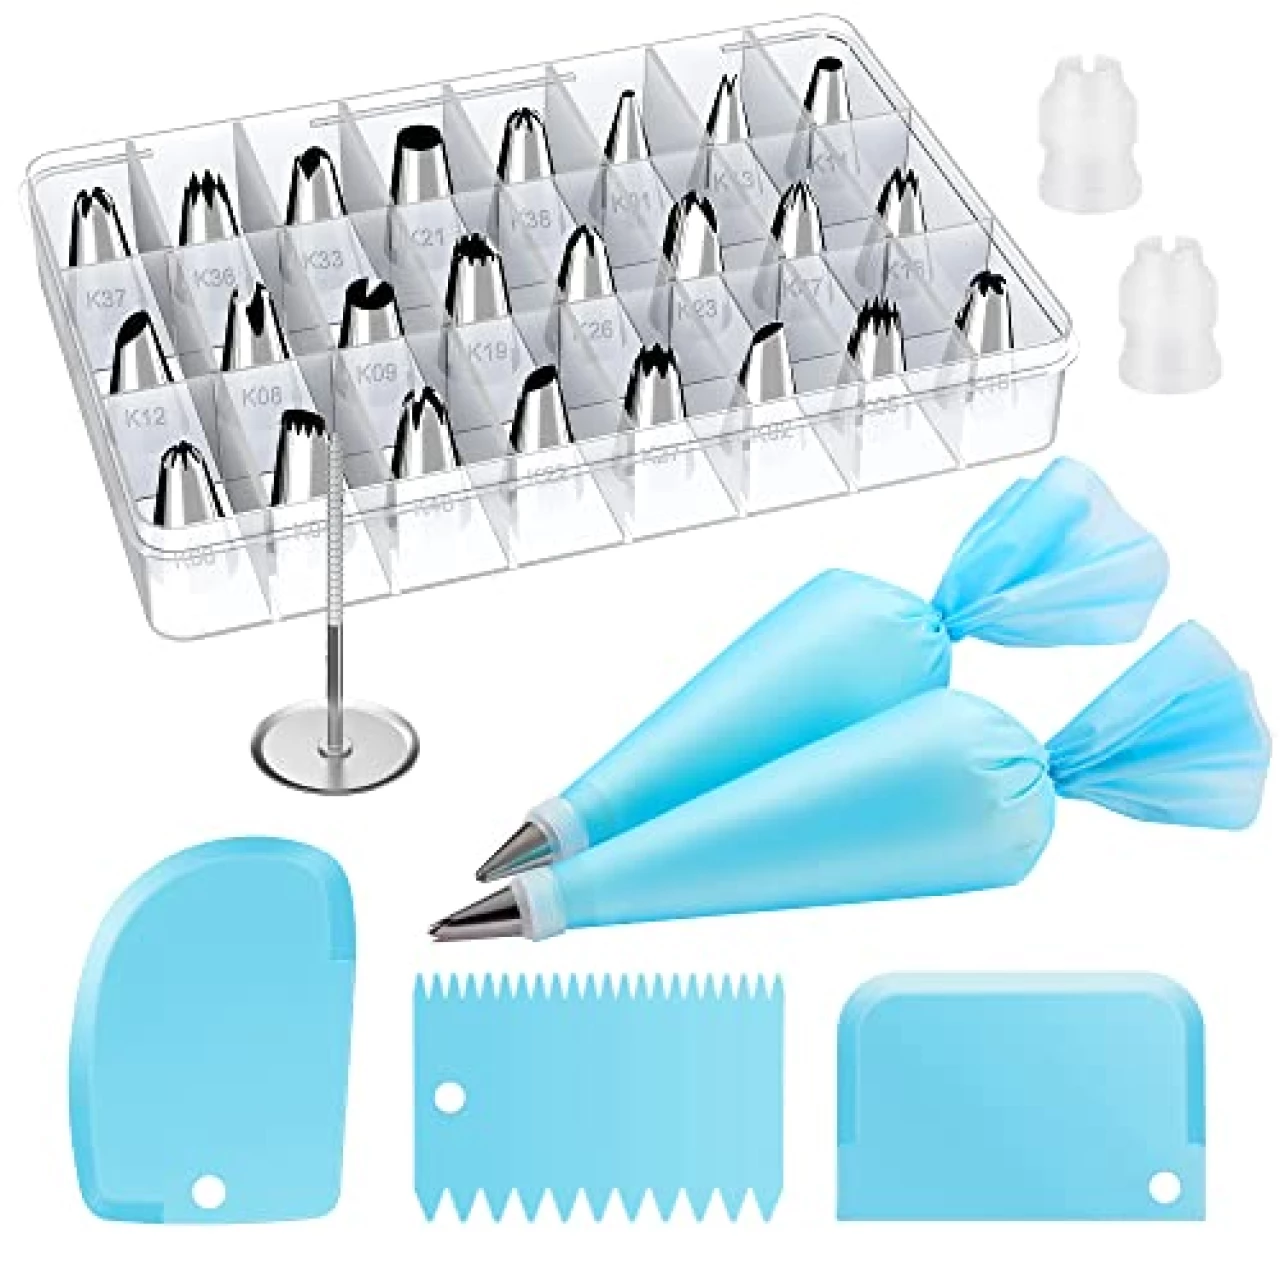 Kootek 32-Piece Piping Bags and Tips Set